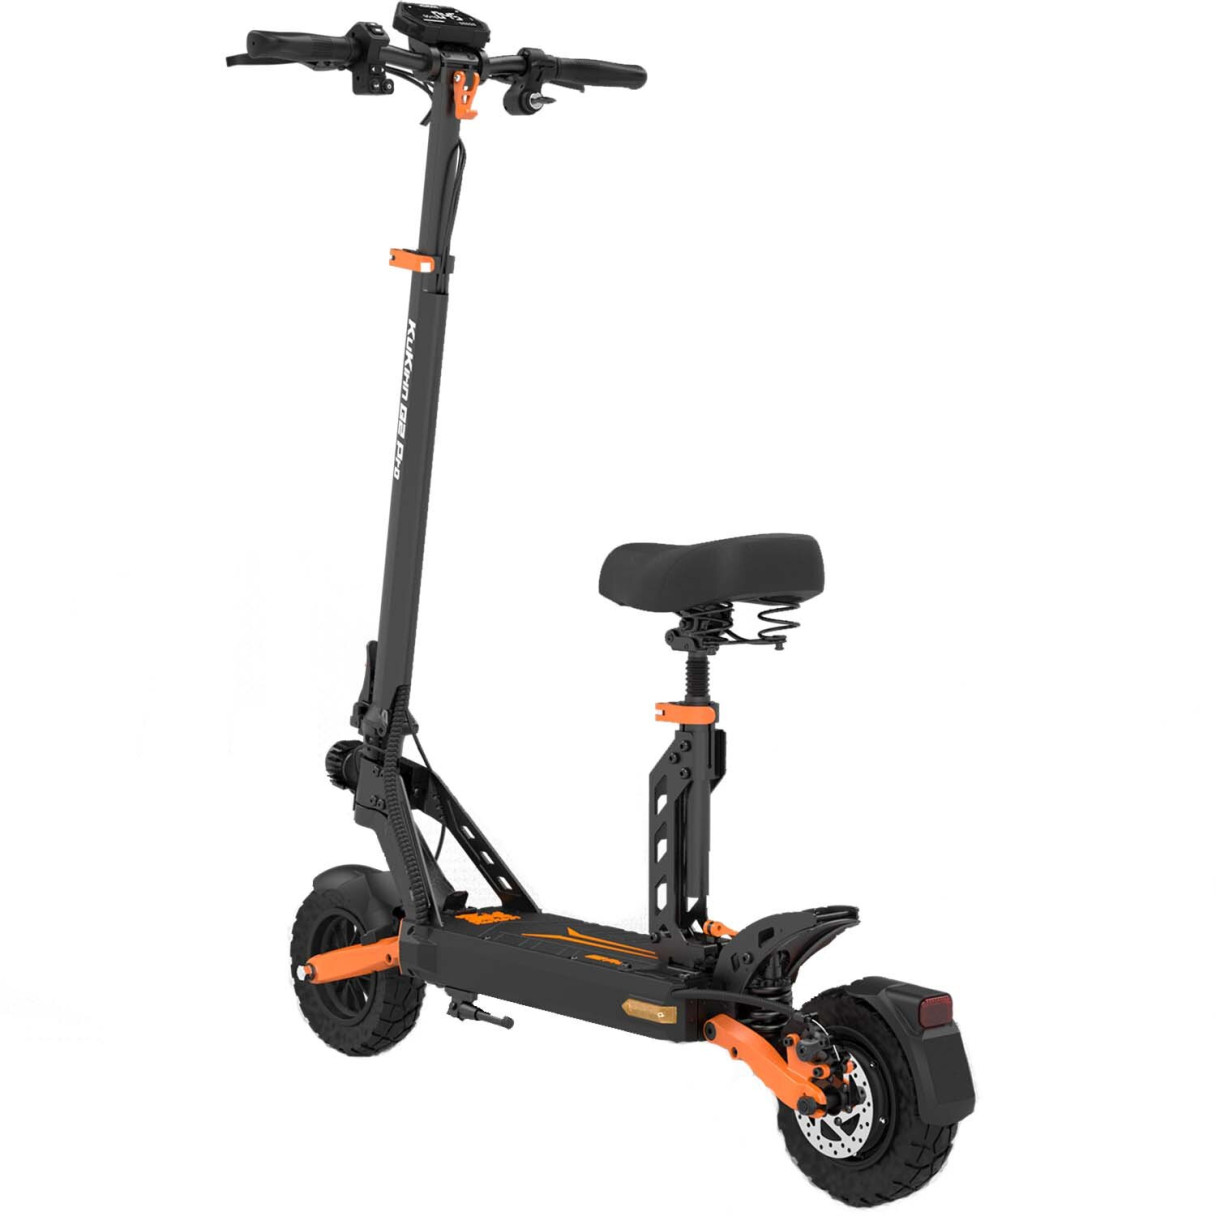 [EU DIRECT] KuKirin G2 Pro NEW Version Electric Scooter 15.6Ah 48V 600W 9inch Folding Moped Electric Scooter 55-60KM Mileage Electric Scooter Max Load 120Kg